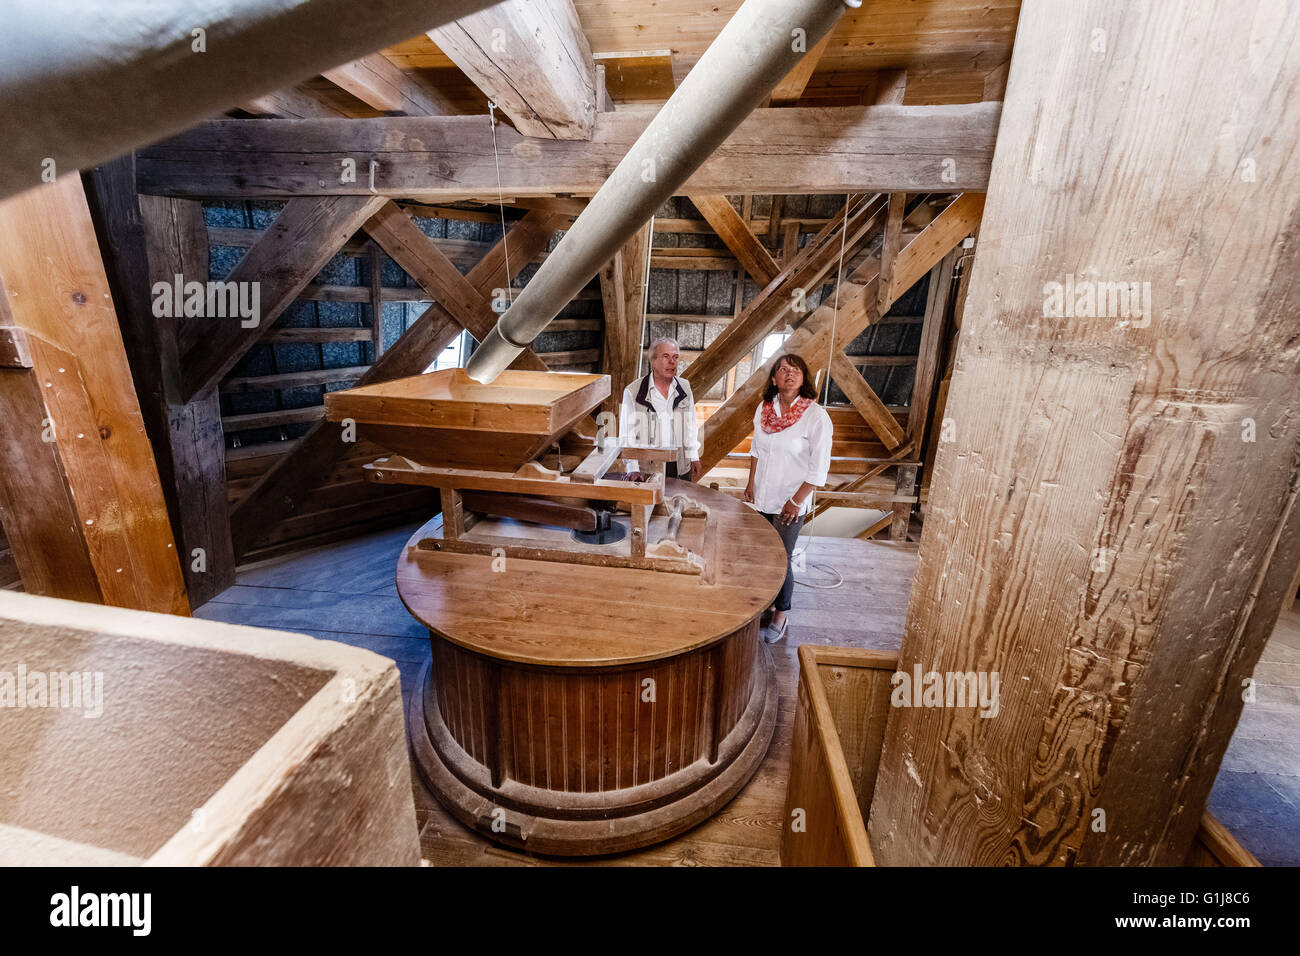 Braak, Germany. 13th May, 2016. Karl-Hermann Vahle, president of the Mill Association, and Maren Lessau from the Mill Association, inspect the grinder in the Braak windmill in Braak, Germany, 13 May 2016. The windmill is one of 52 wind and watermills open to the public on 16 May 2016, German Mills Day. Photo: Markus Scholz/dpa/Alamy Live News Stock Photo